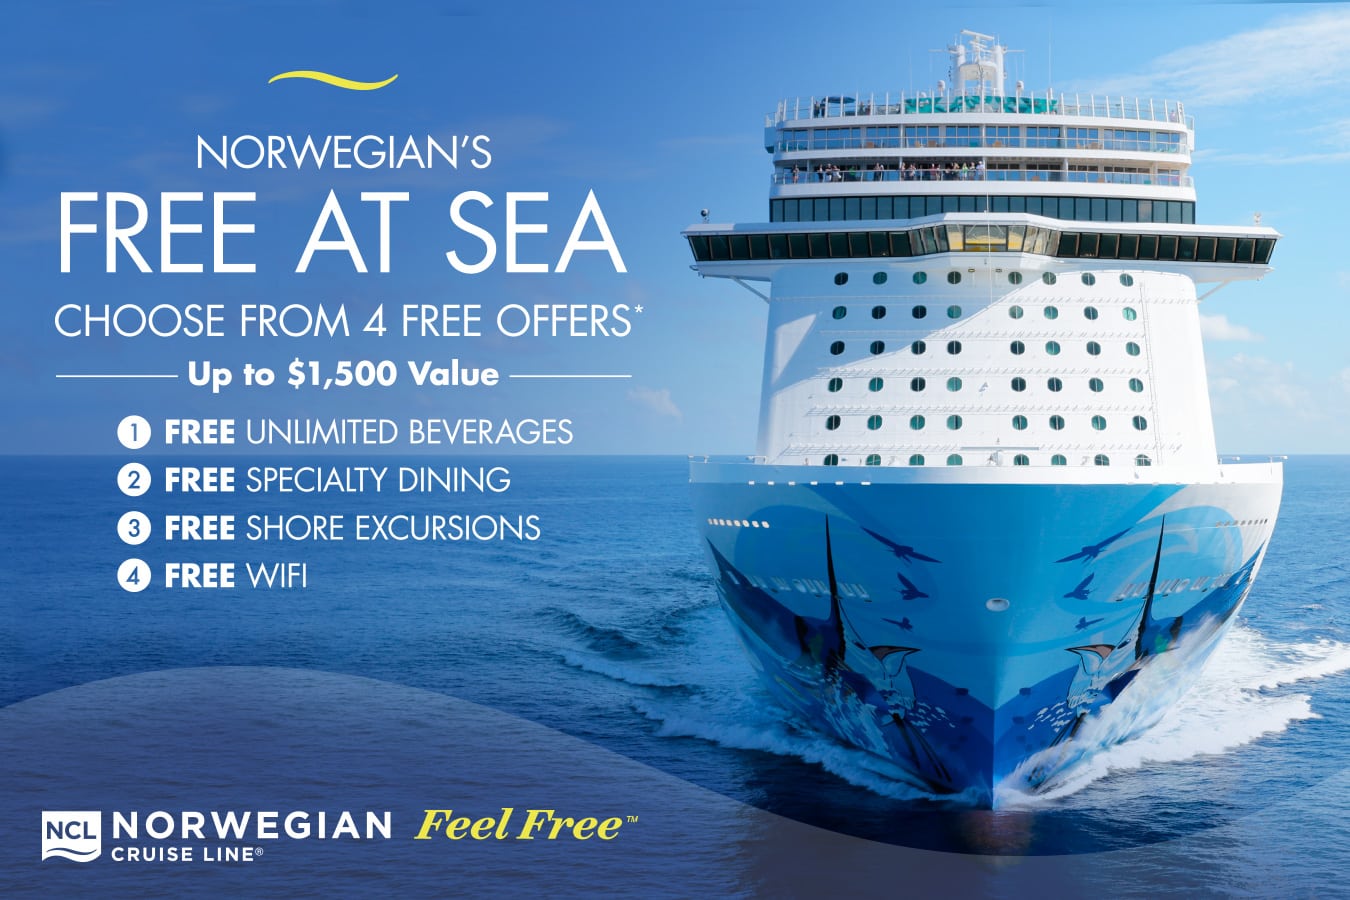 Norwegian Cruise Line's new brand campaign ties in to its wave season "Free at Sea" promotion.